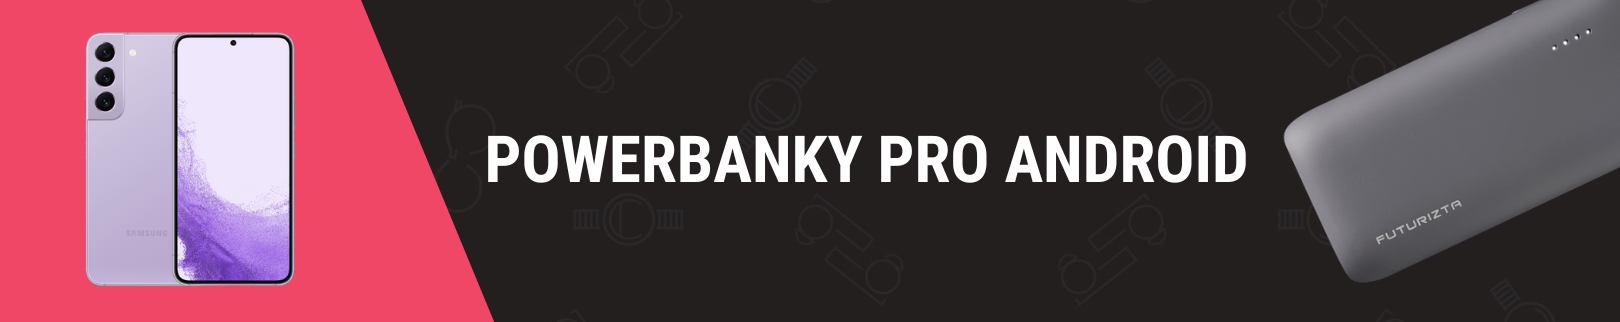 POWERBANKY PRO ANDROID